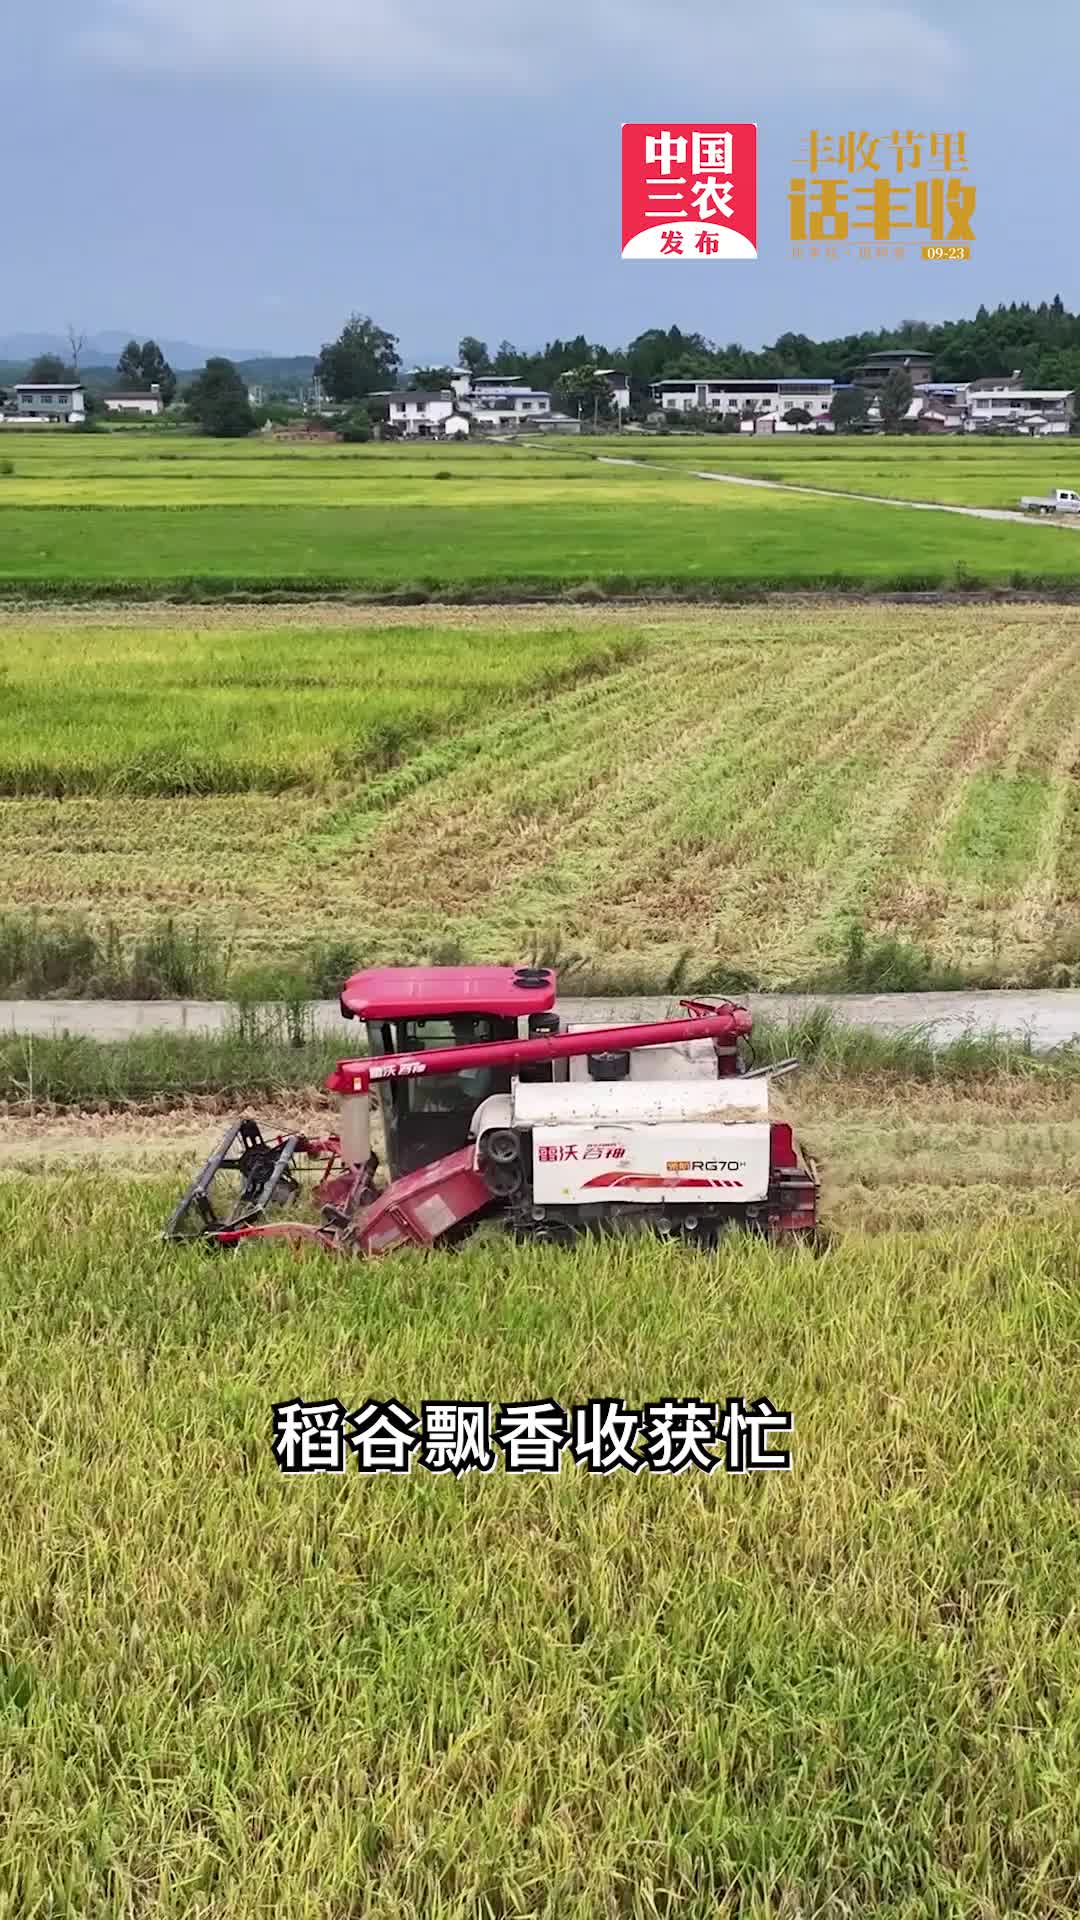  China's agriculture, rural areas and farmers released the talk of bumper harvest in the V # Harvest Festival of the All Network University